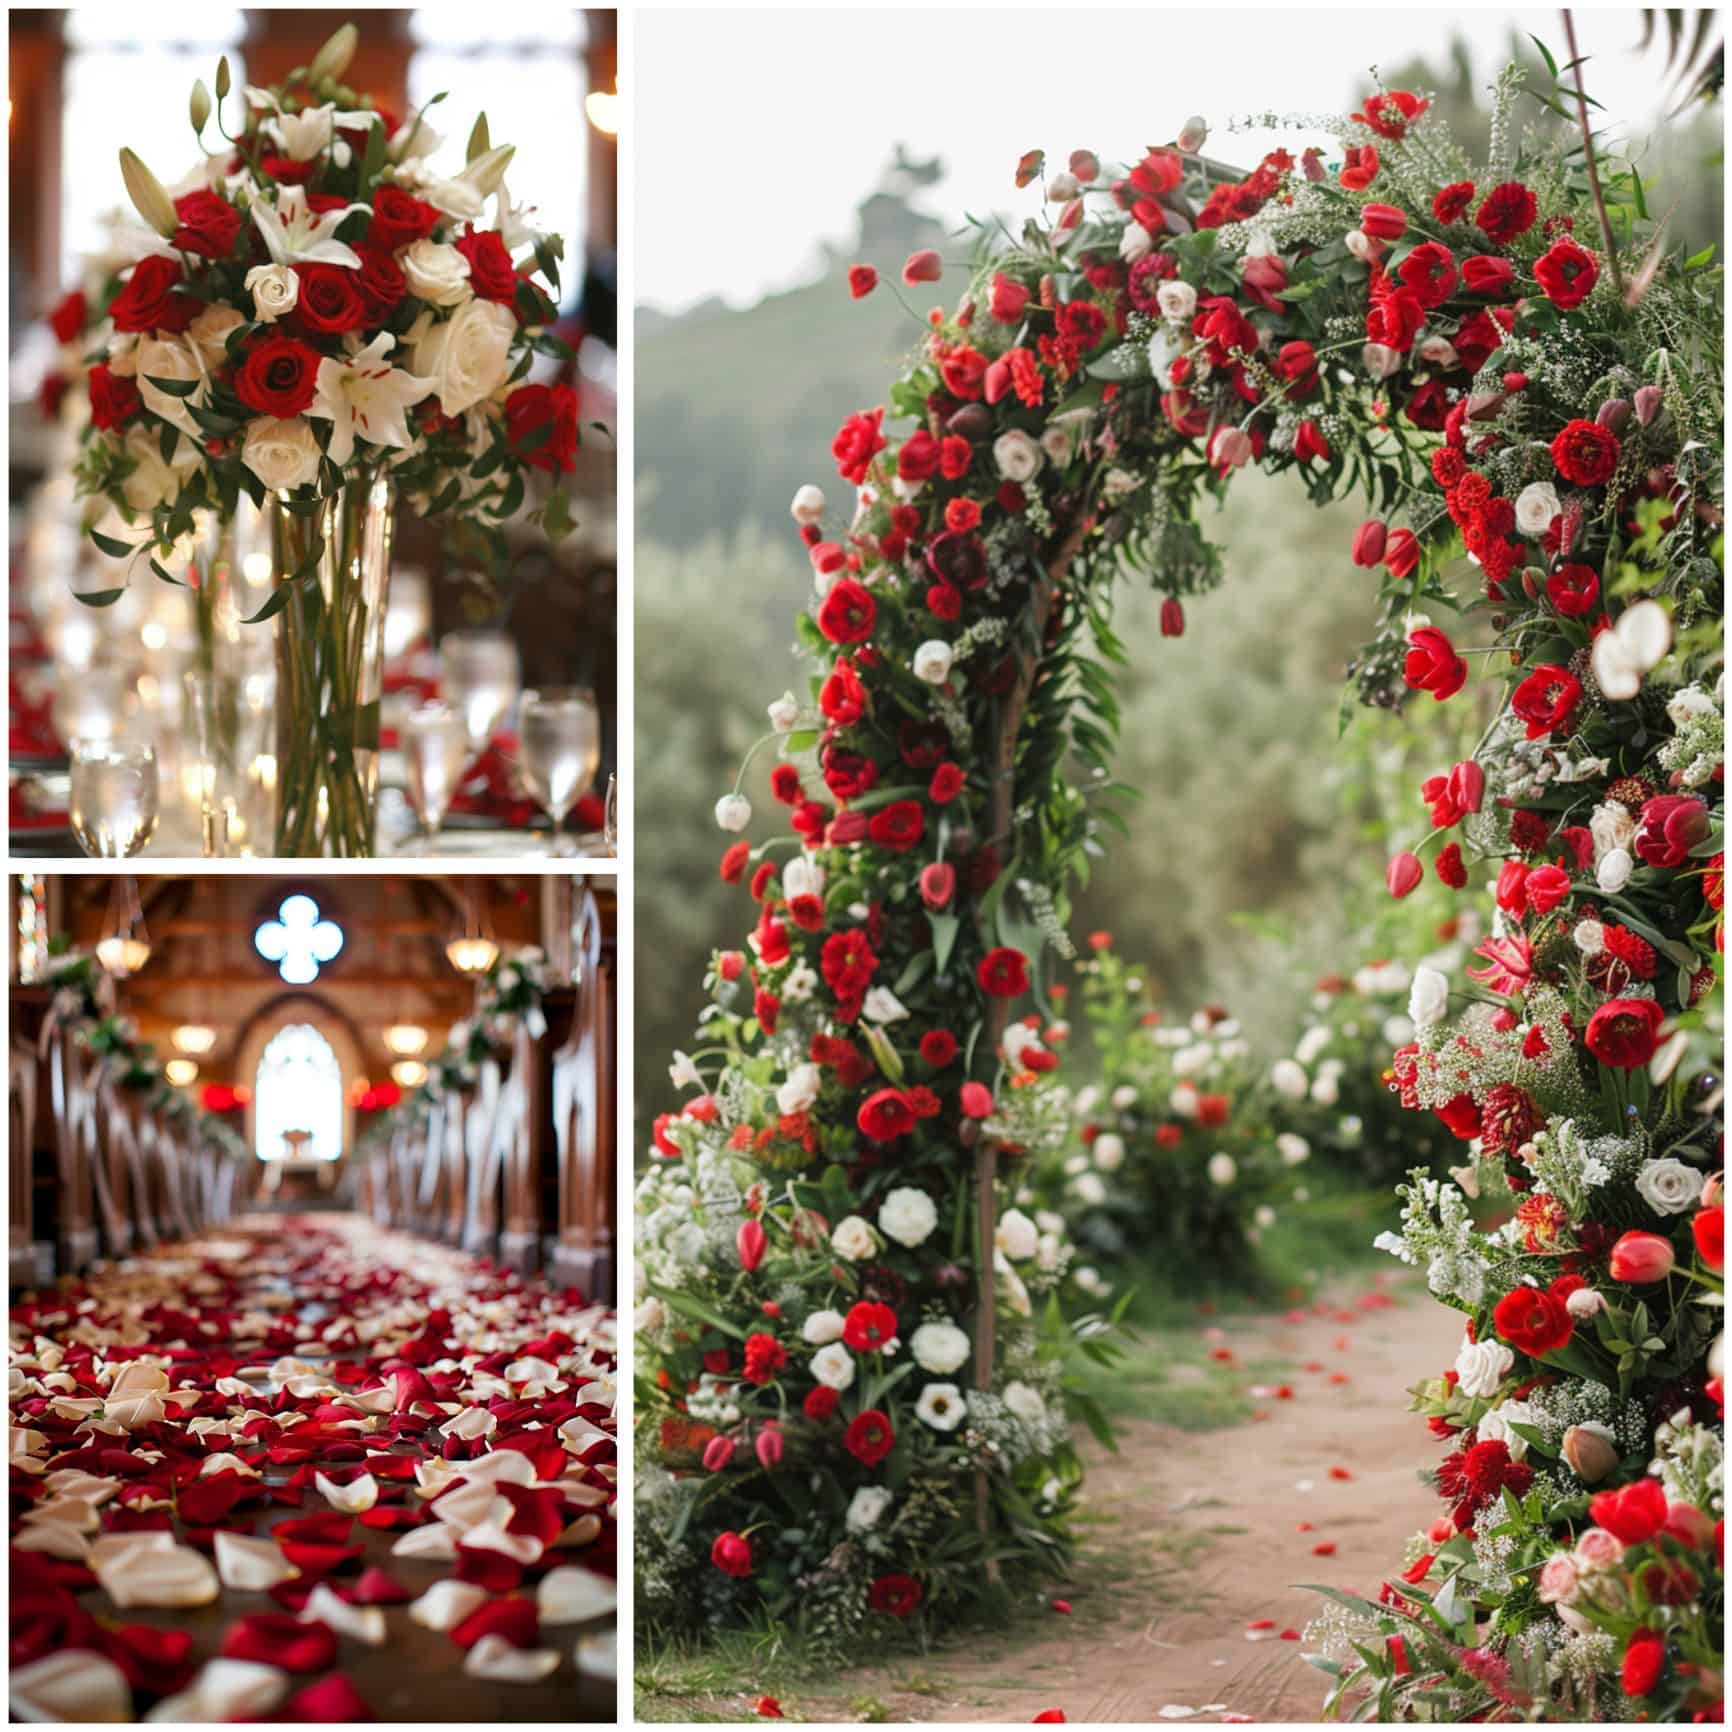 red and white wedding theme ideas for incorporating flowers